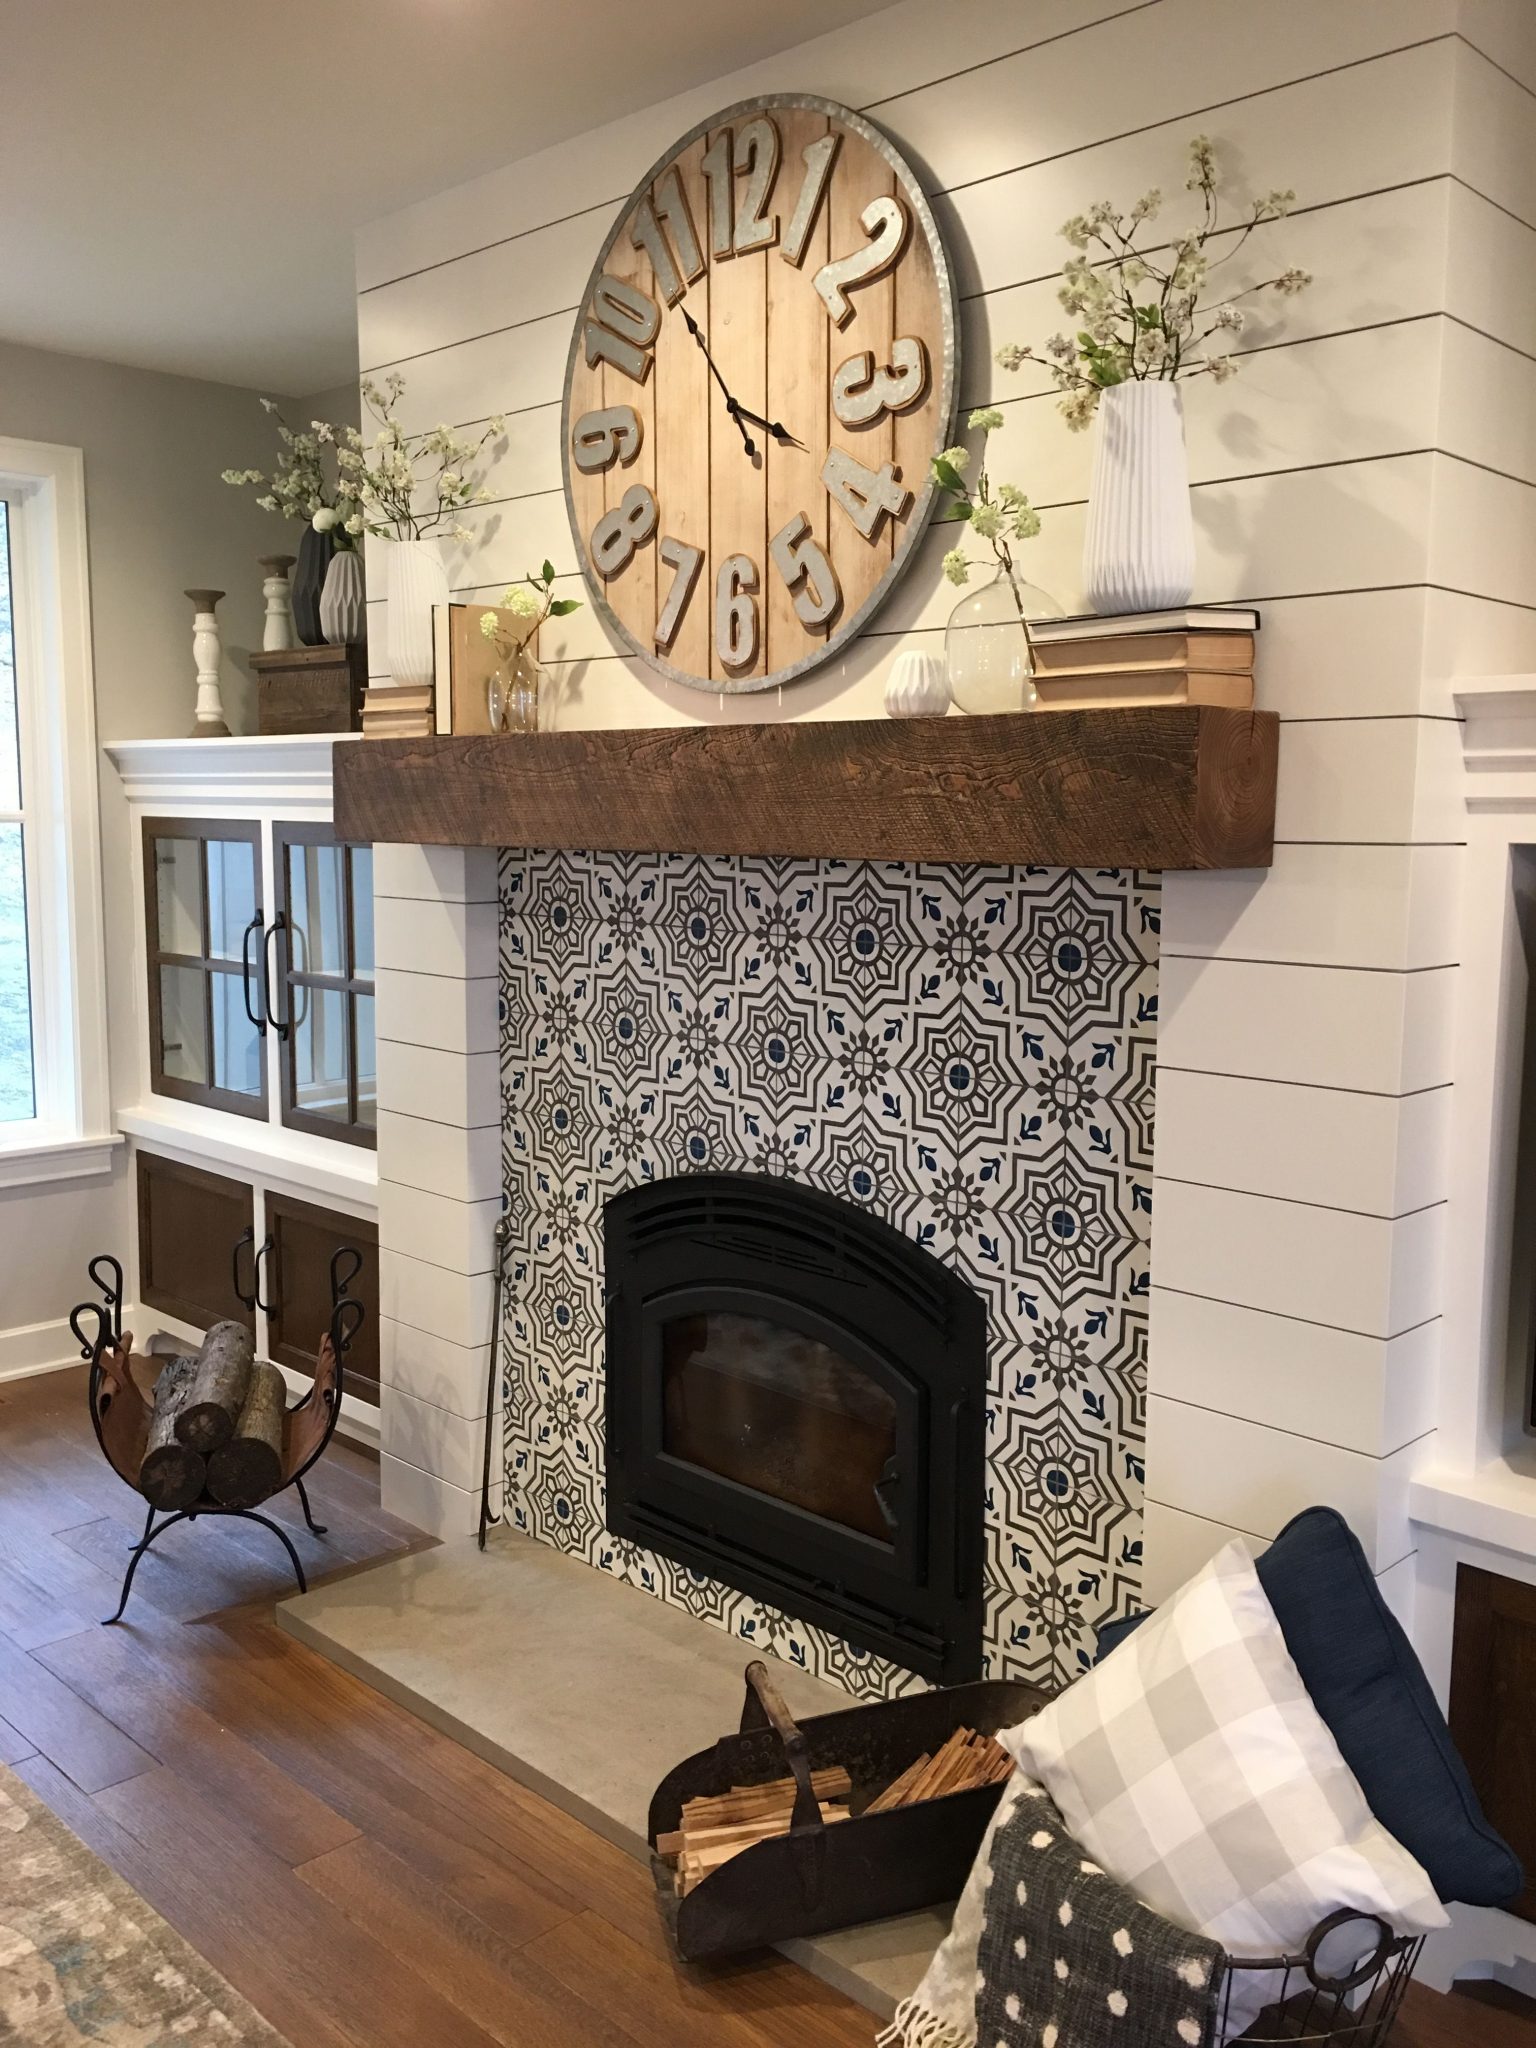 Fireplace Decor Ideas While Saving Space